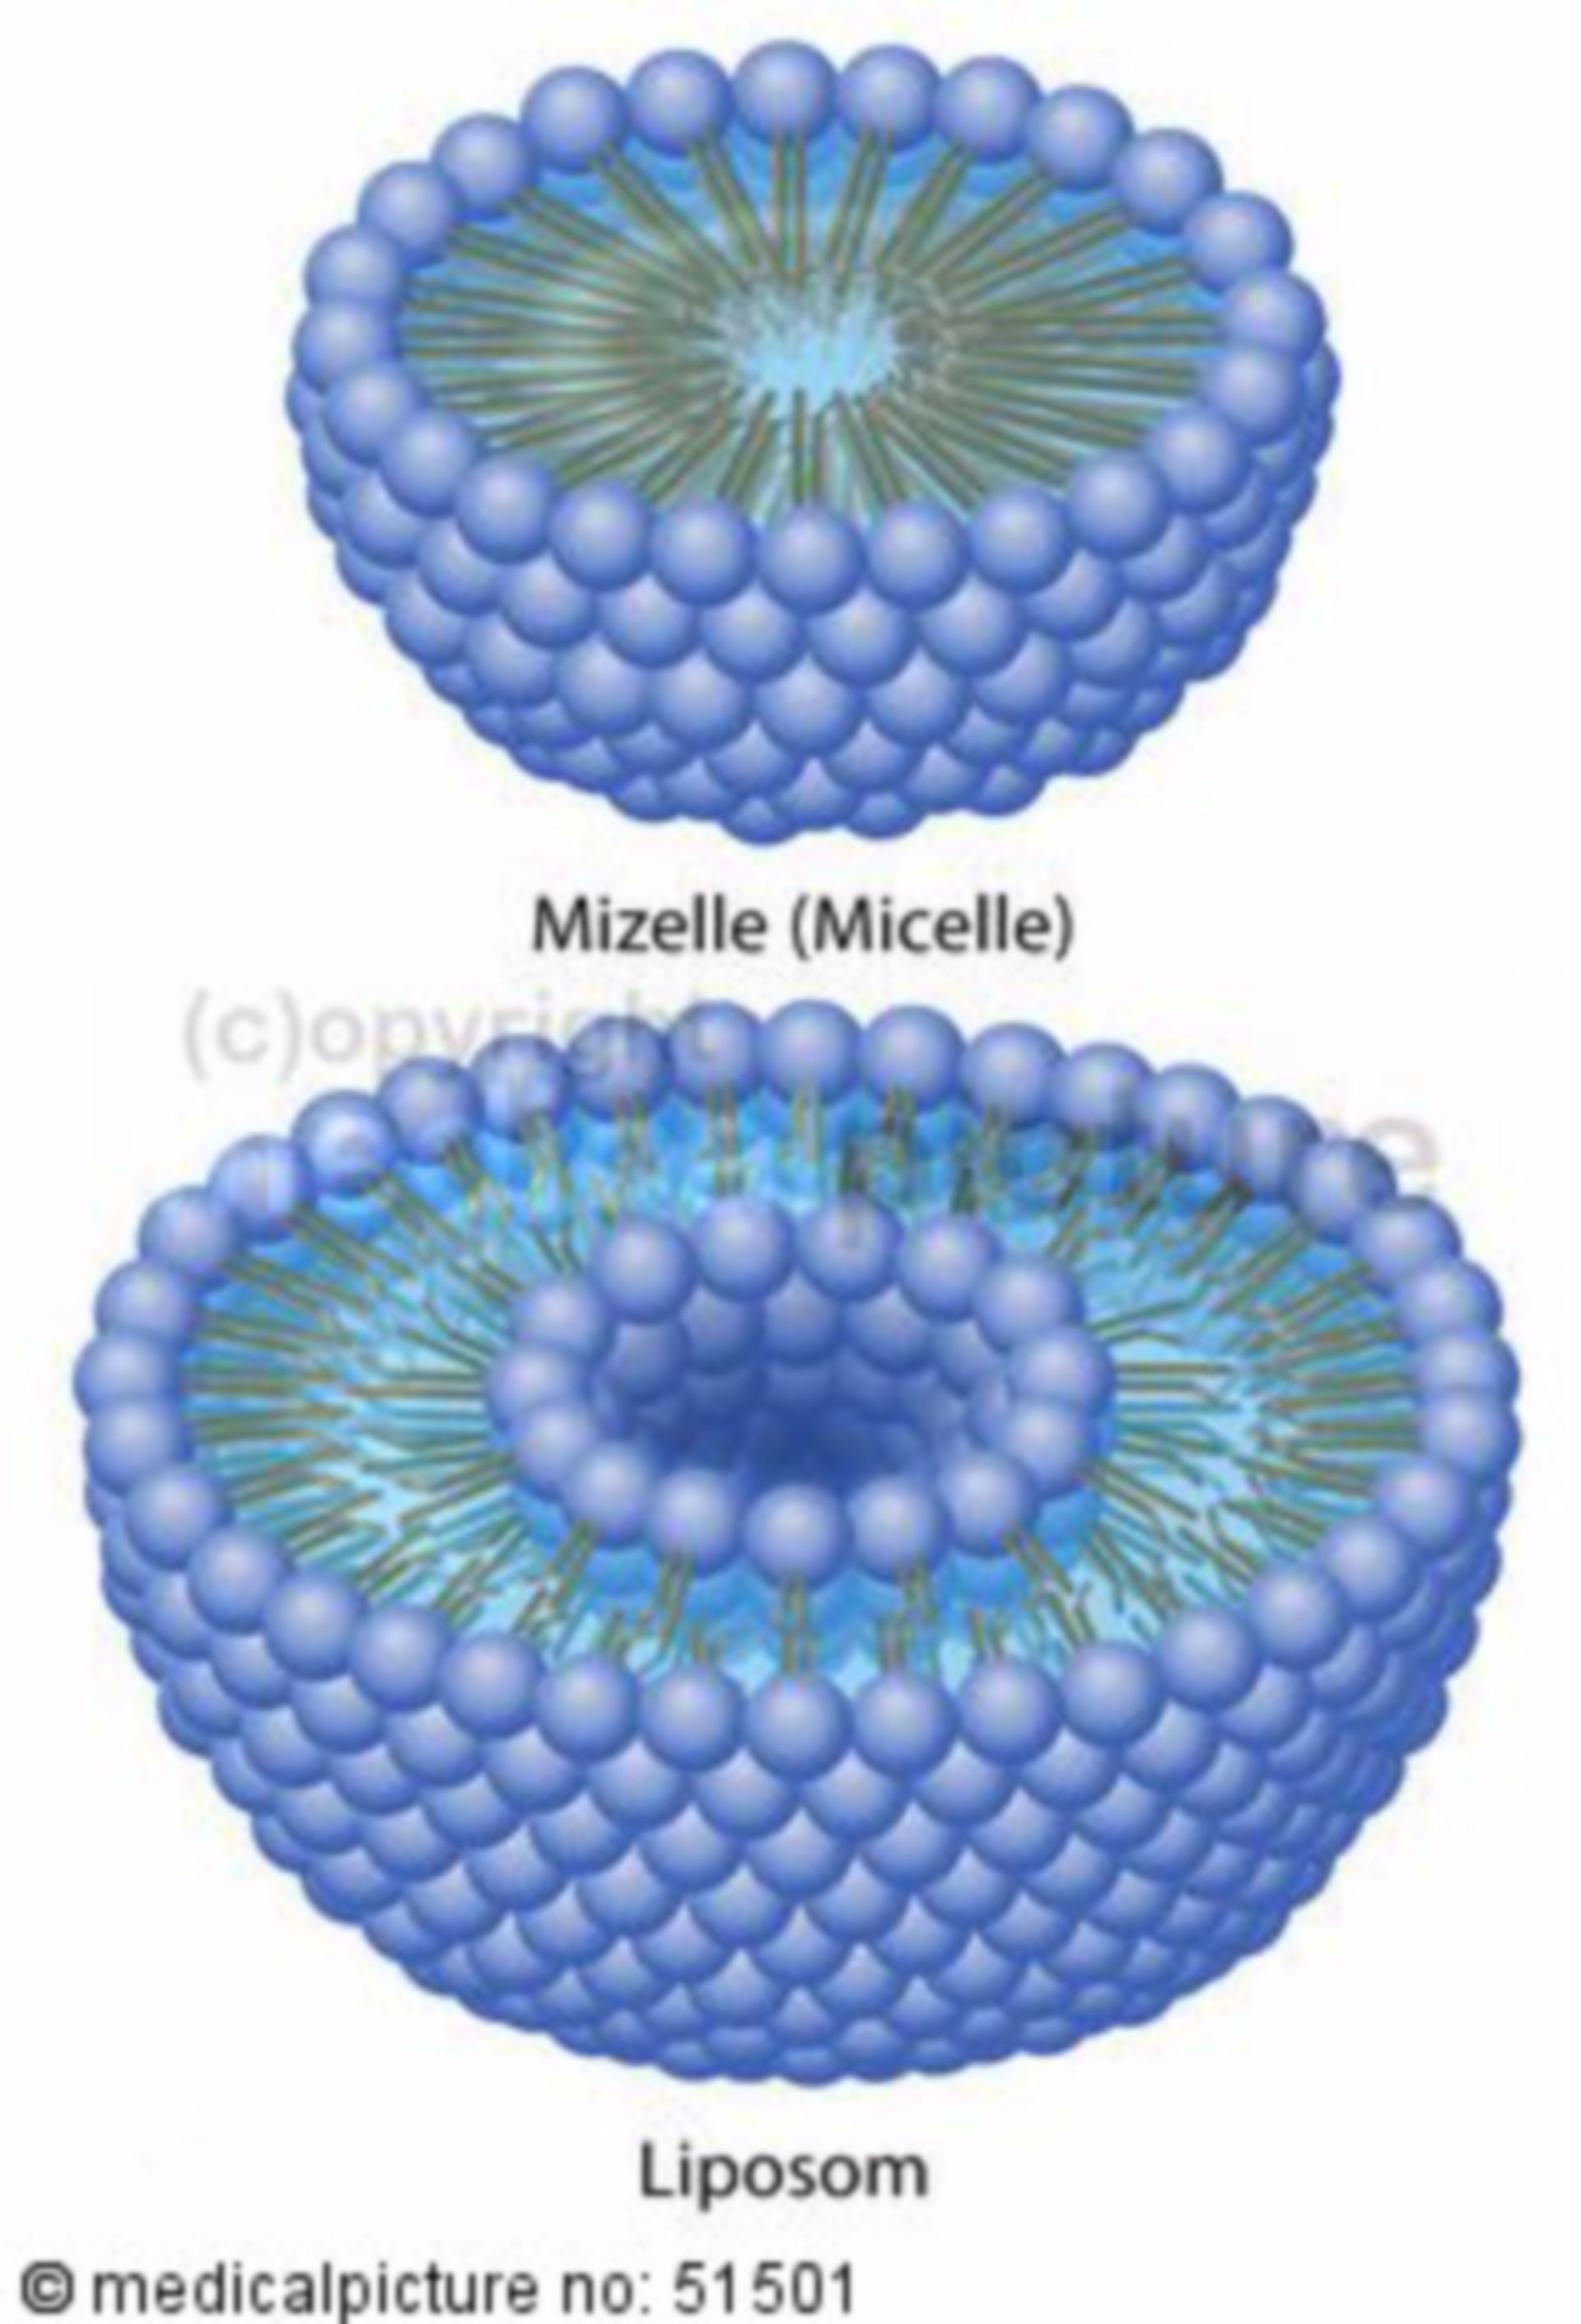 Micelle and liposome